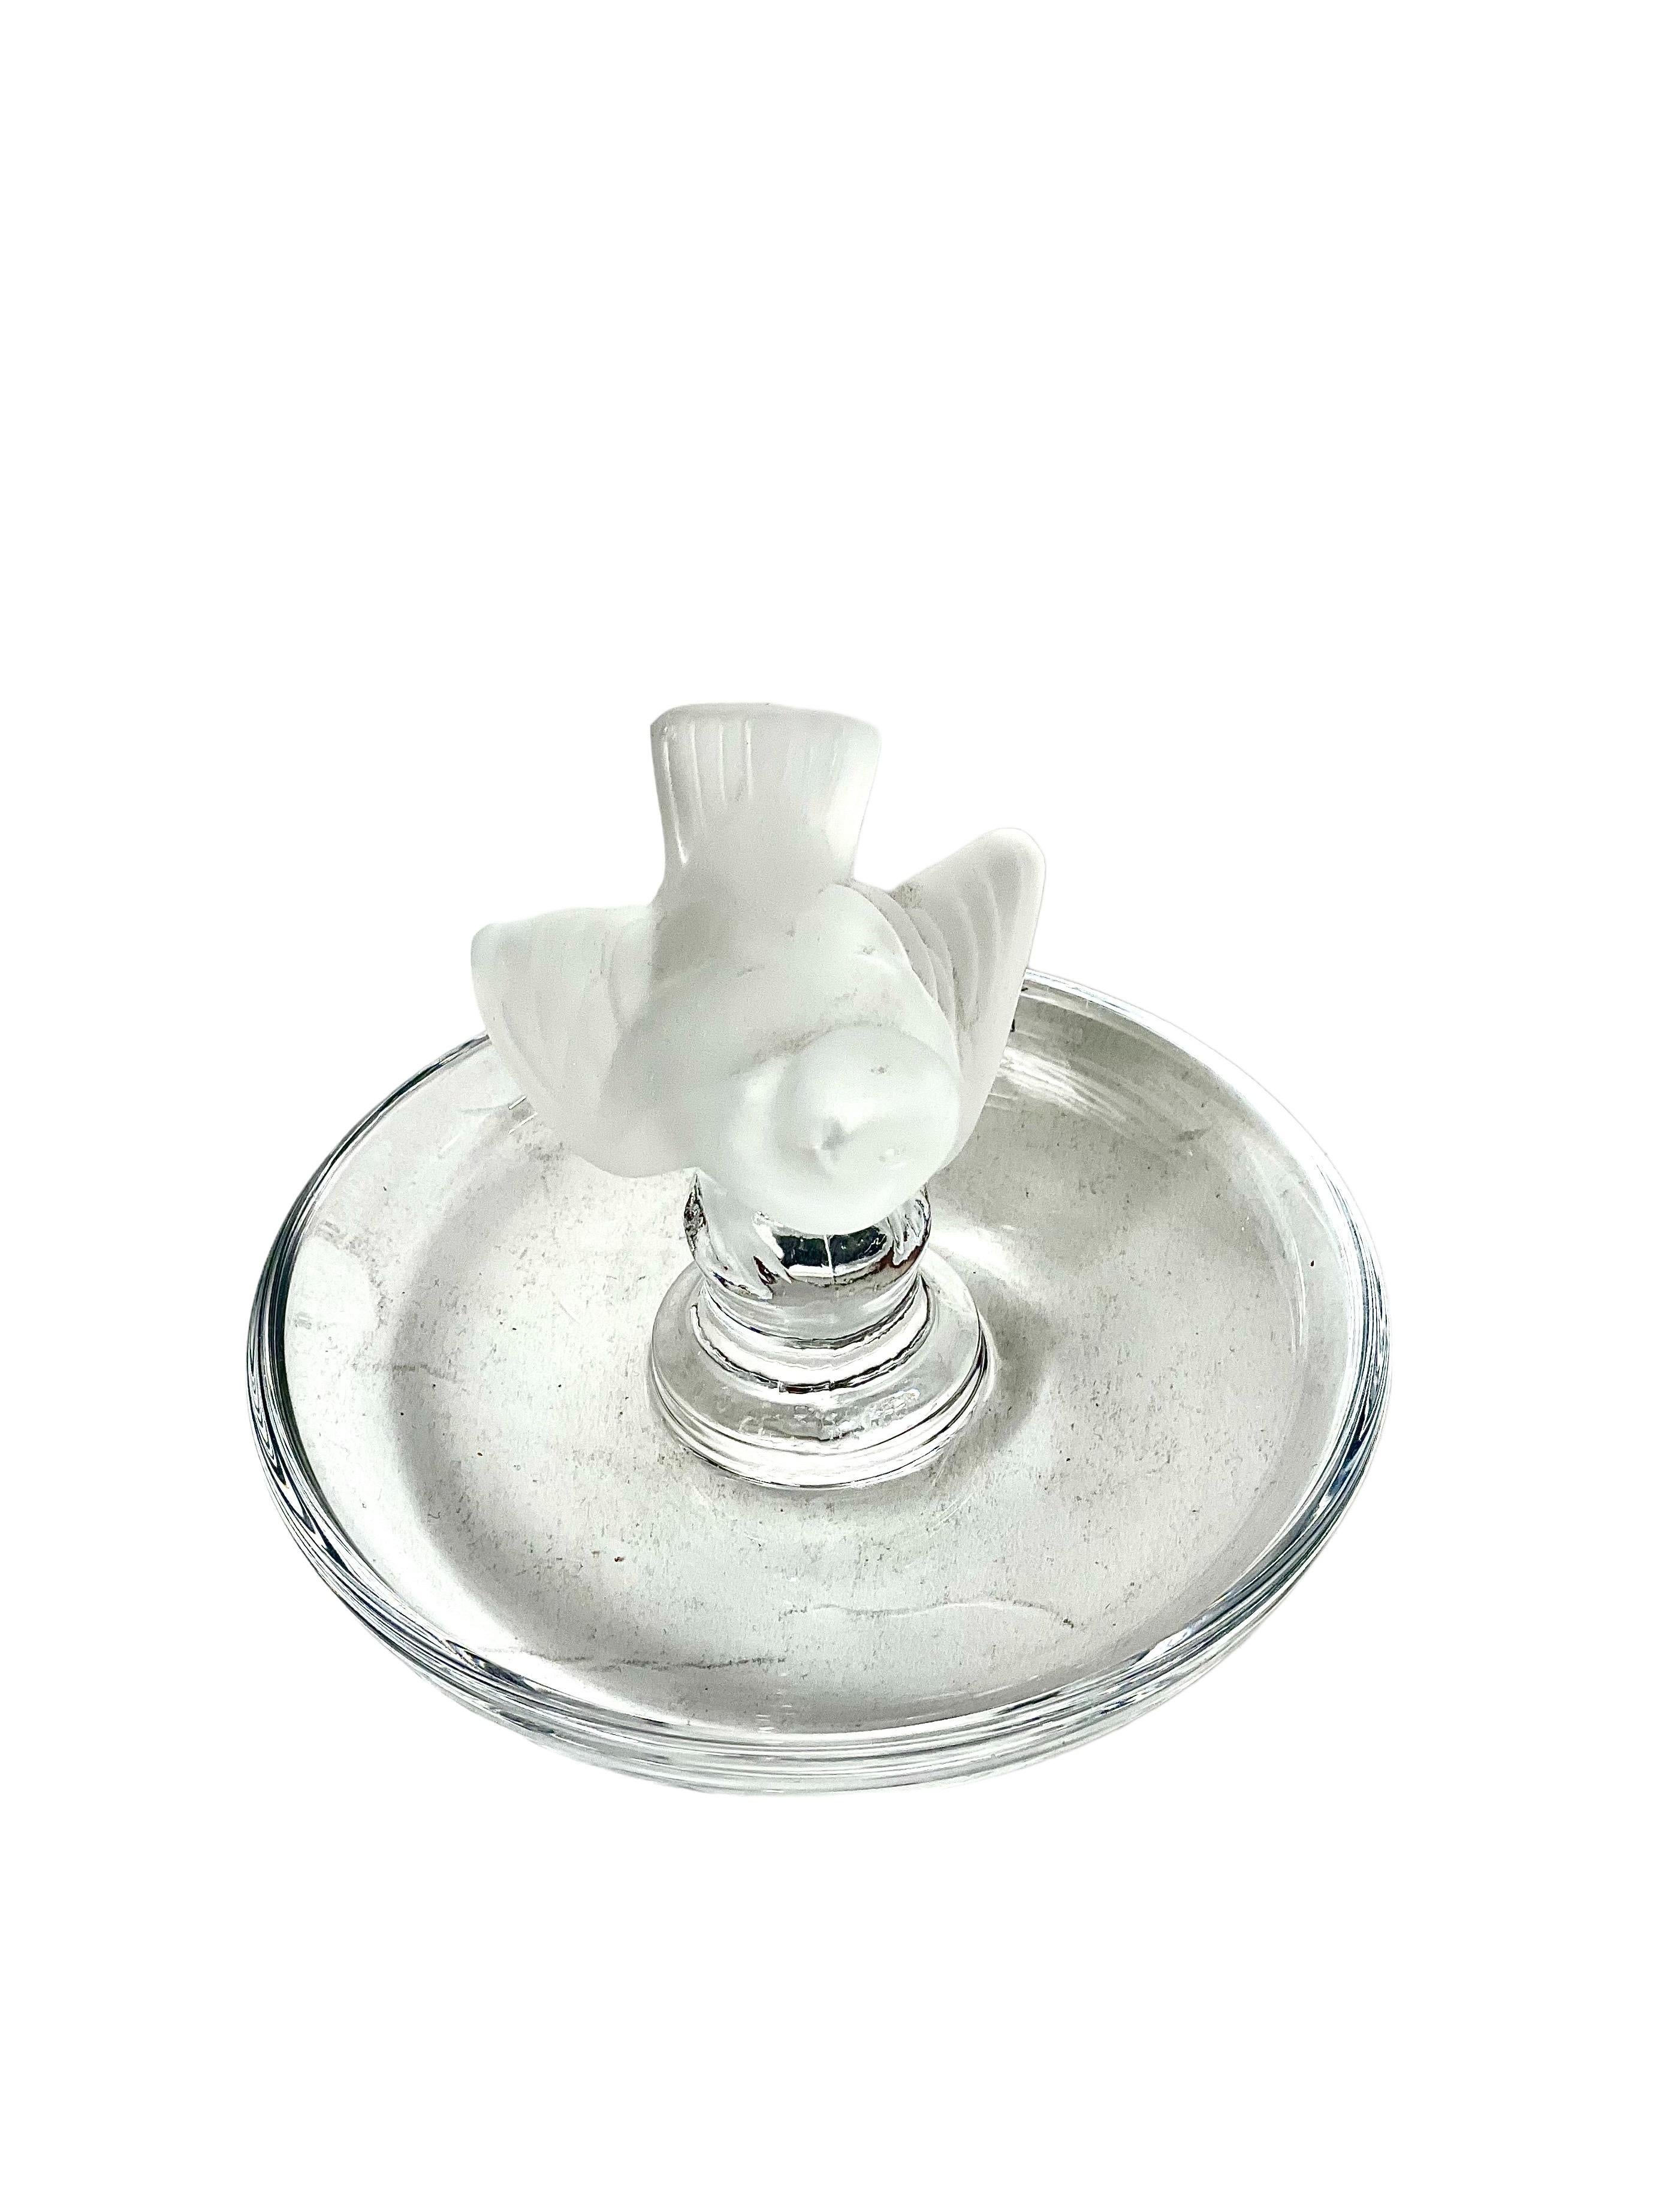 A delicate crystal ring dish surmounted with a frosted sparrow, from the renowned crystal and glass design brand, Lalique. This very pretty and iconic dish offers an elegant yet practical place to store favourite pieces of jewellery and small